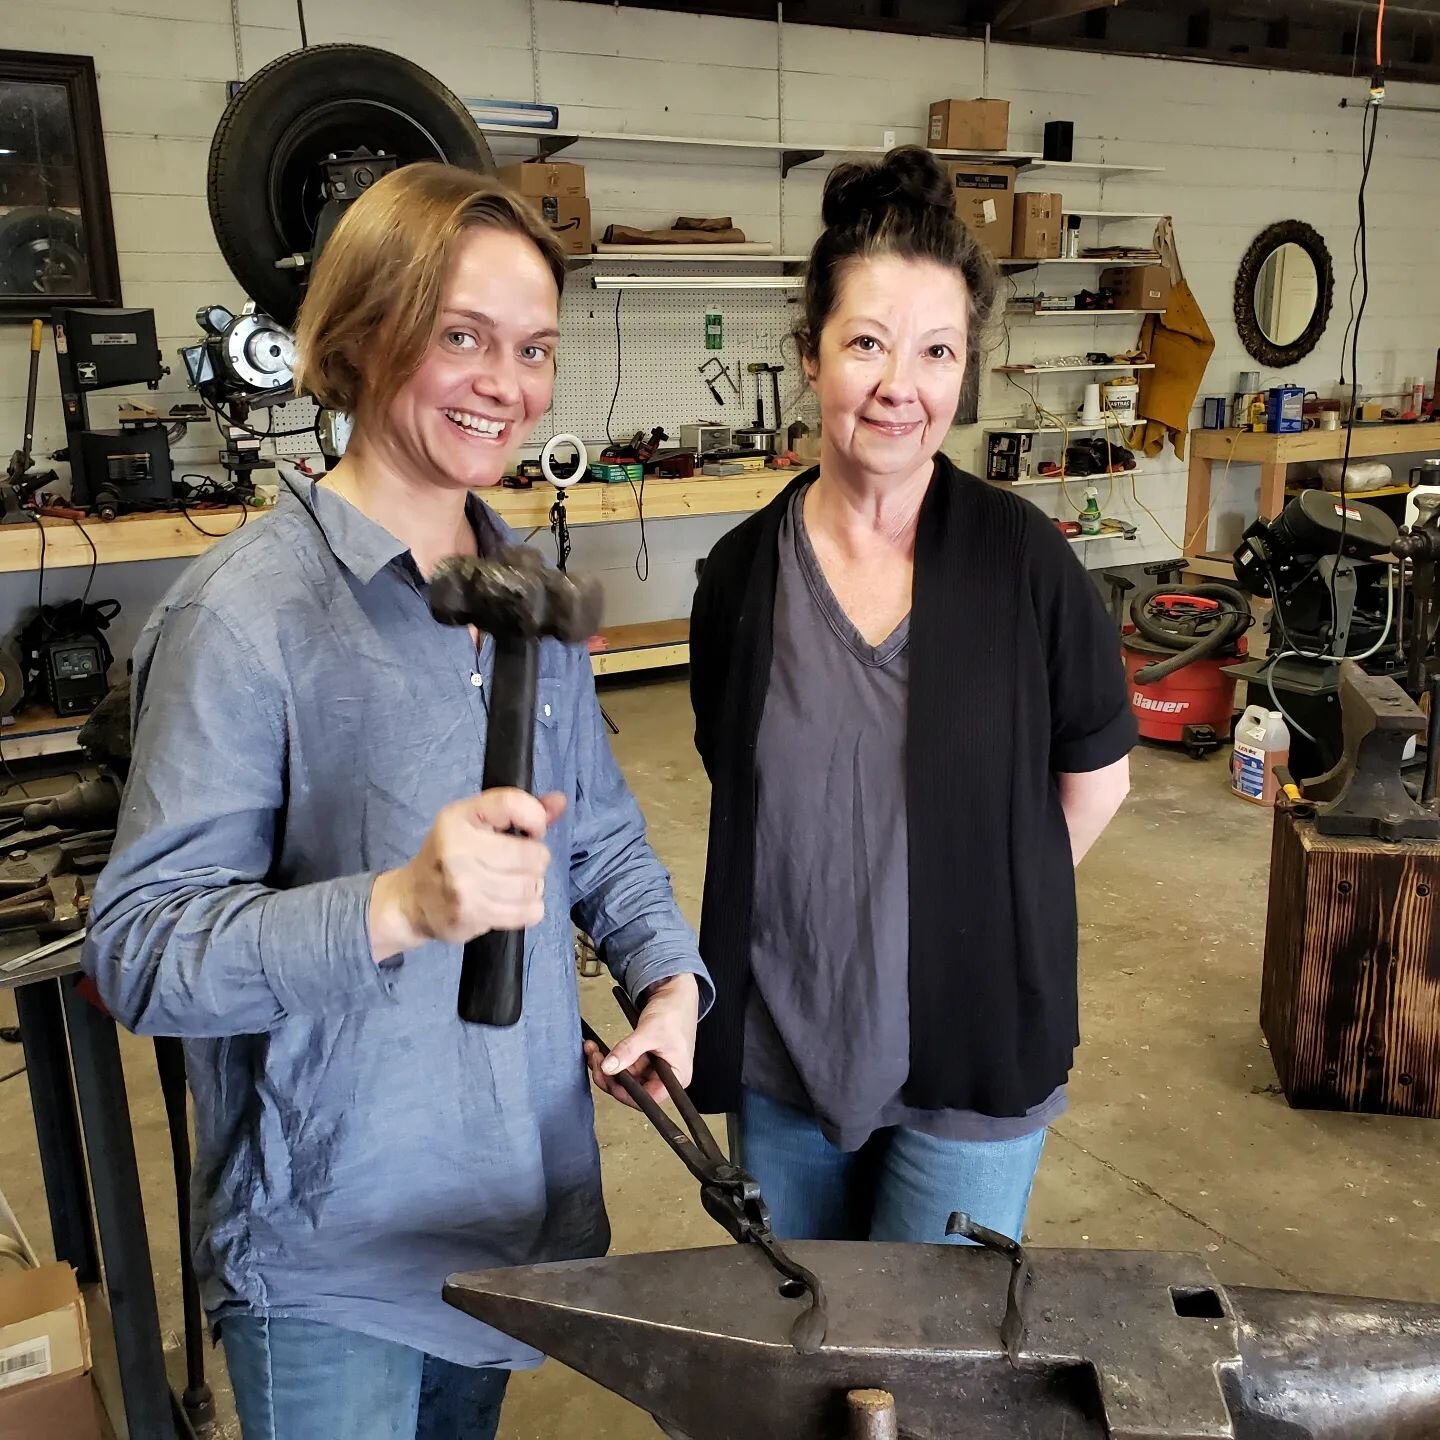 Happy to have @elizabrownjewelry and @skye.erie in the shop for some blacksmithing this morning. Both came into the shop with metalworking experience and so they flew through the project, making some really nice hooks with a leaf detail. ##Blacksmith